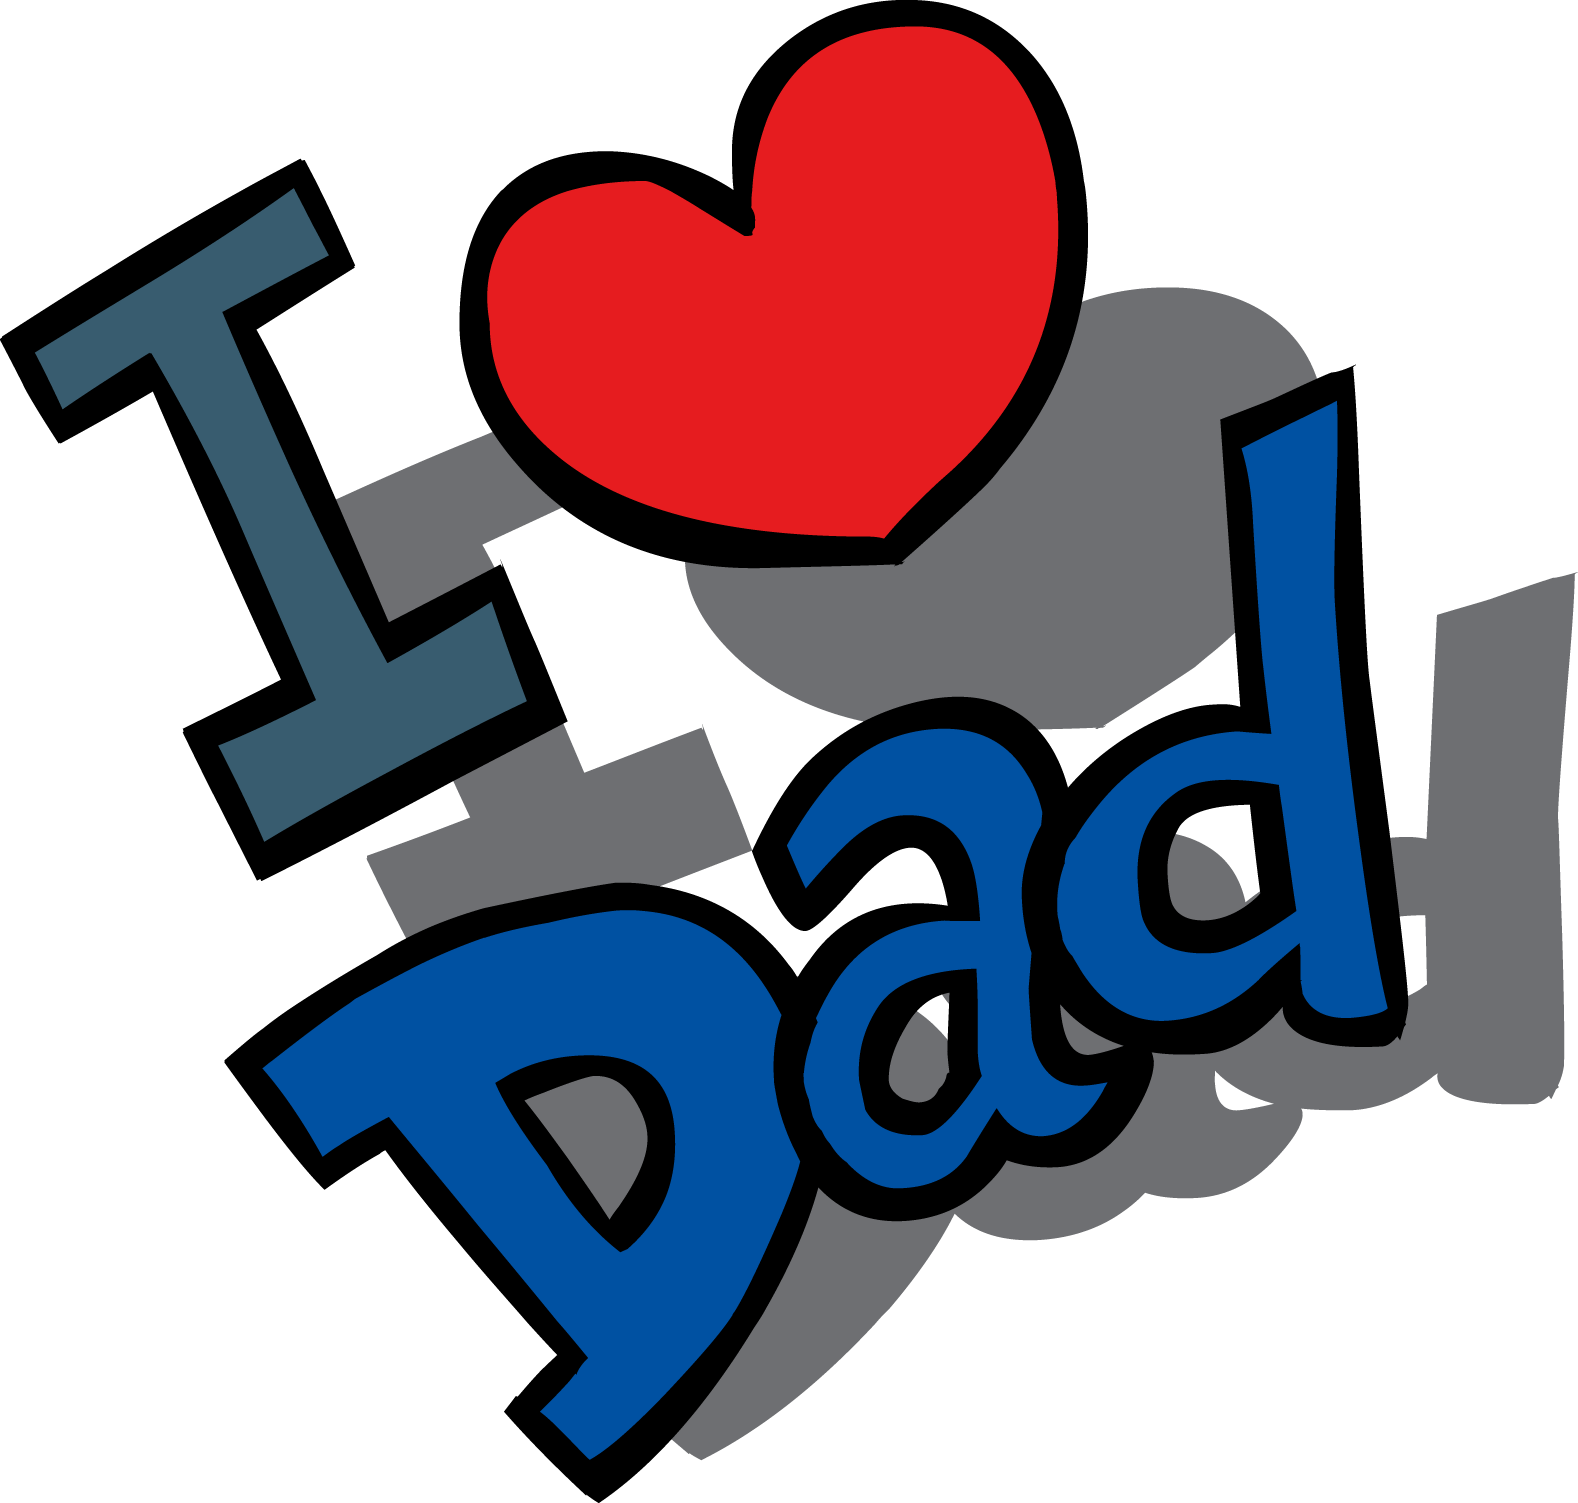 Fathers day free clip art father clipart image 3